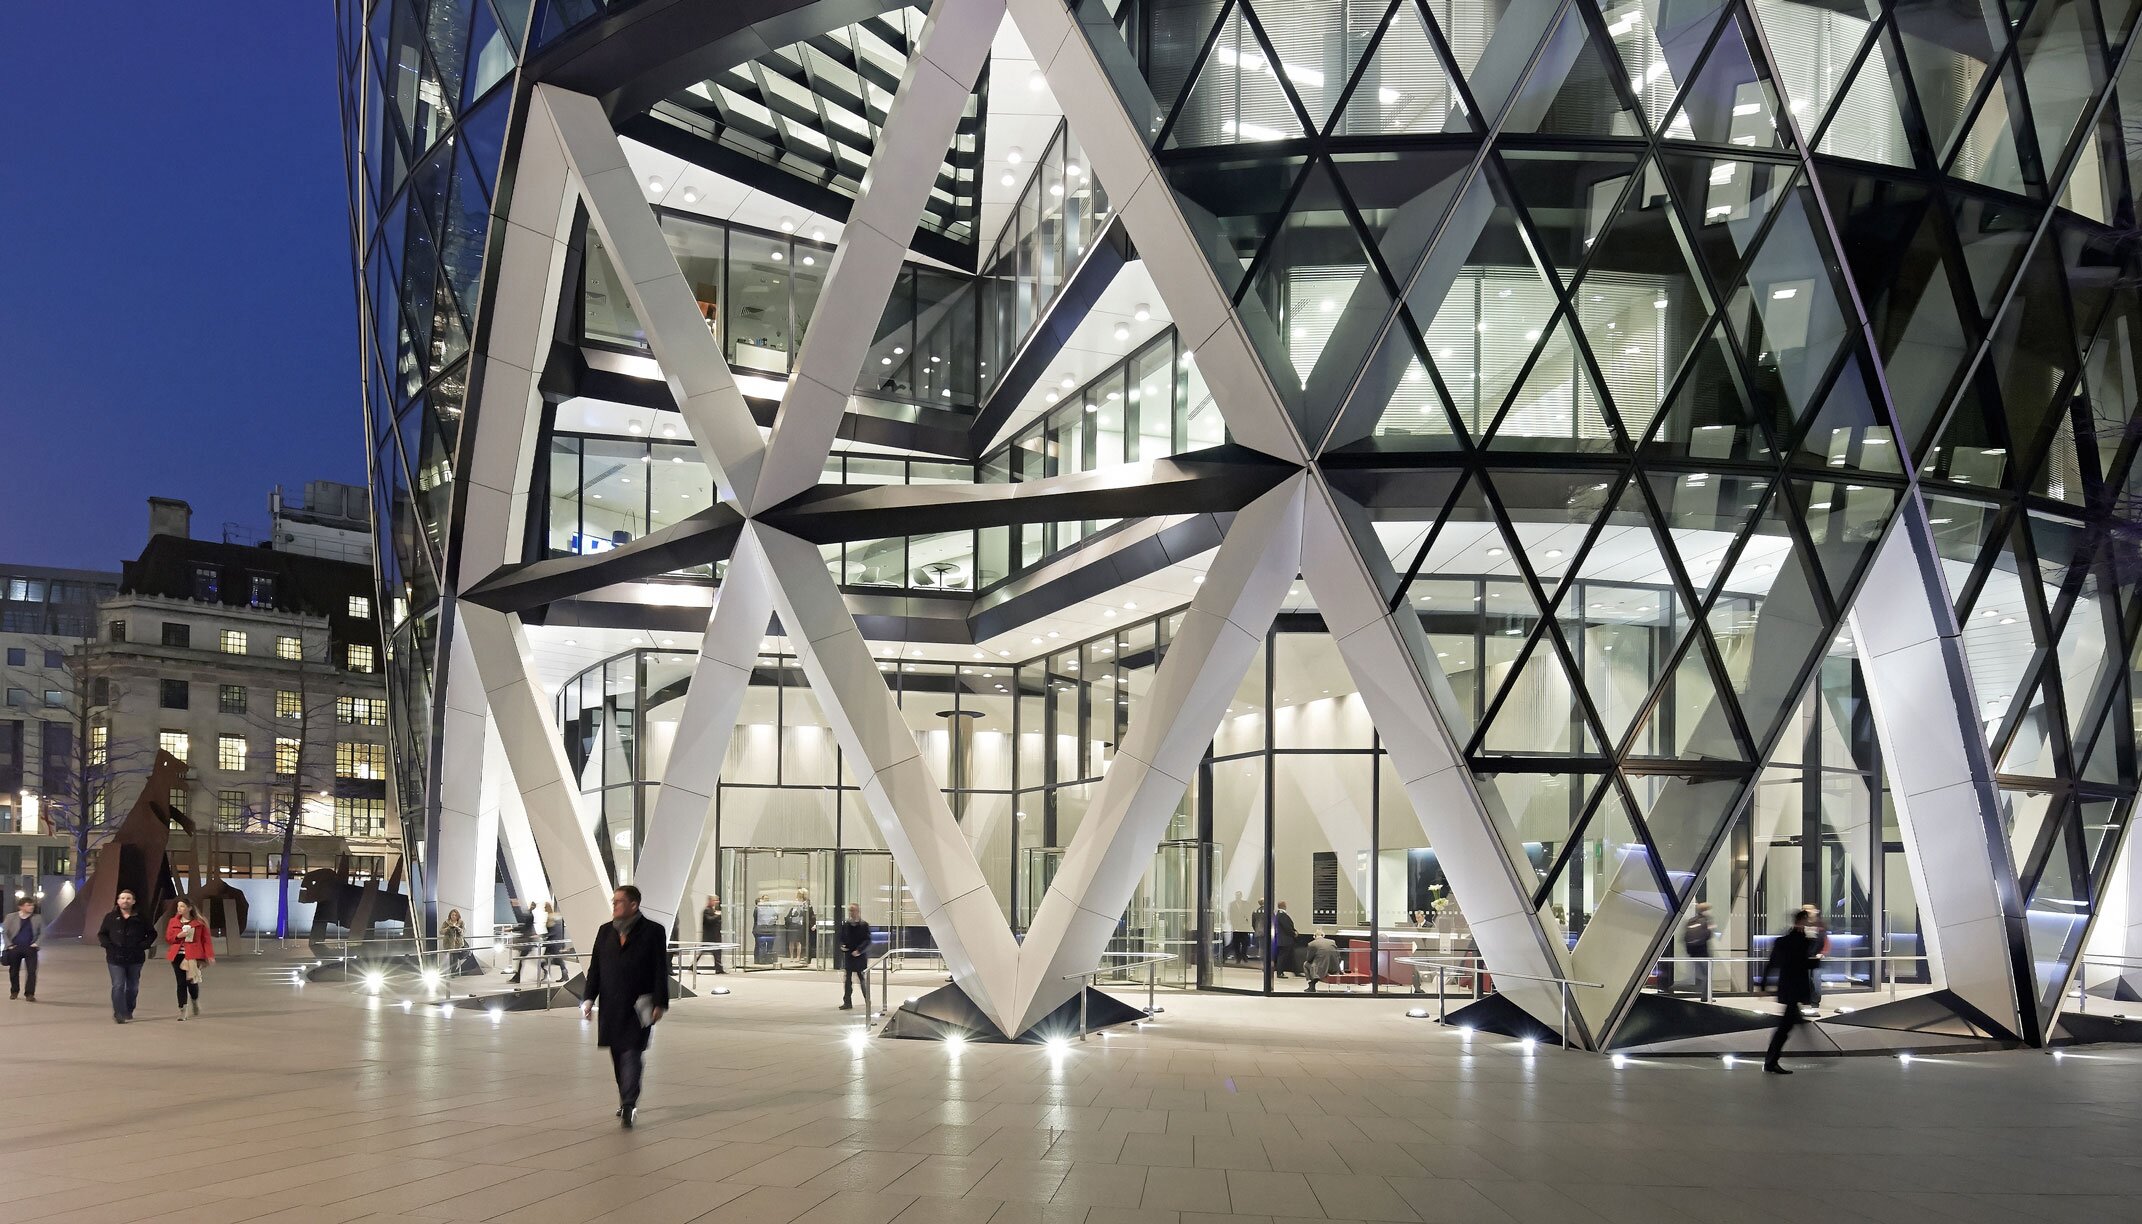 30 St. Mary Axe/The Gherkin: Column cladding by POHL